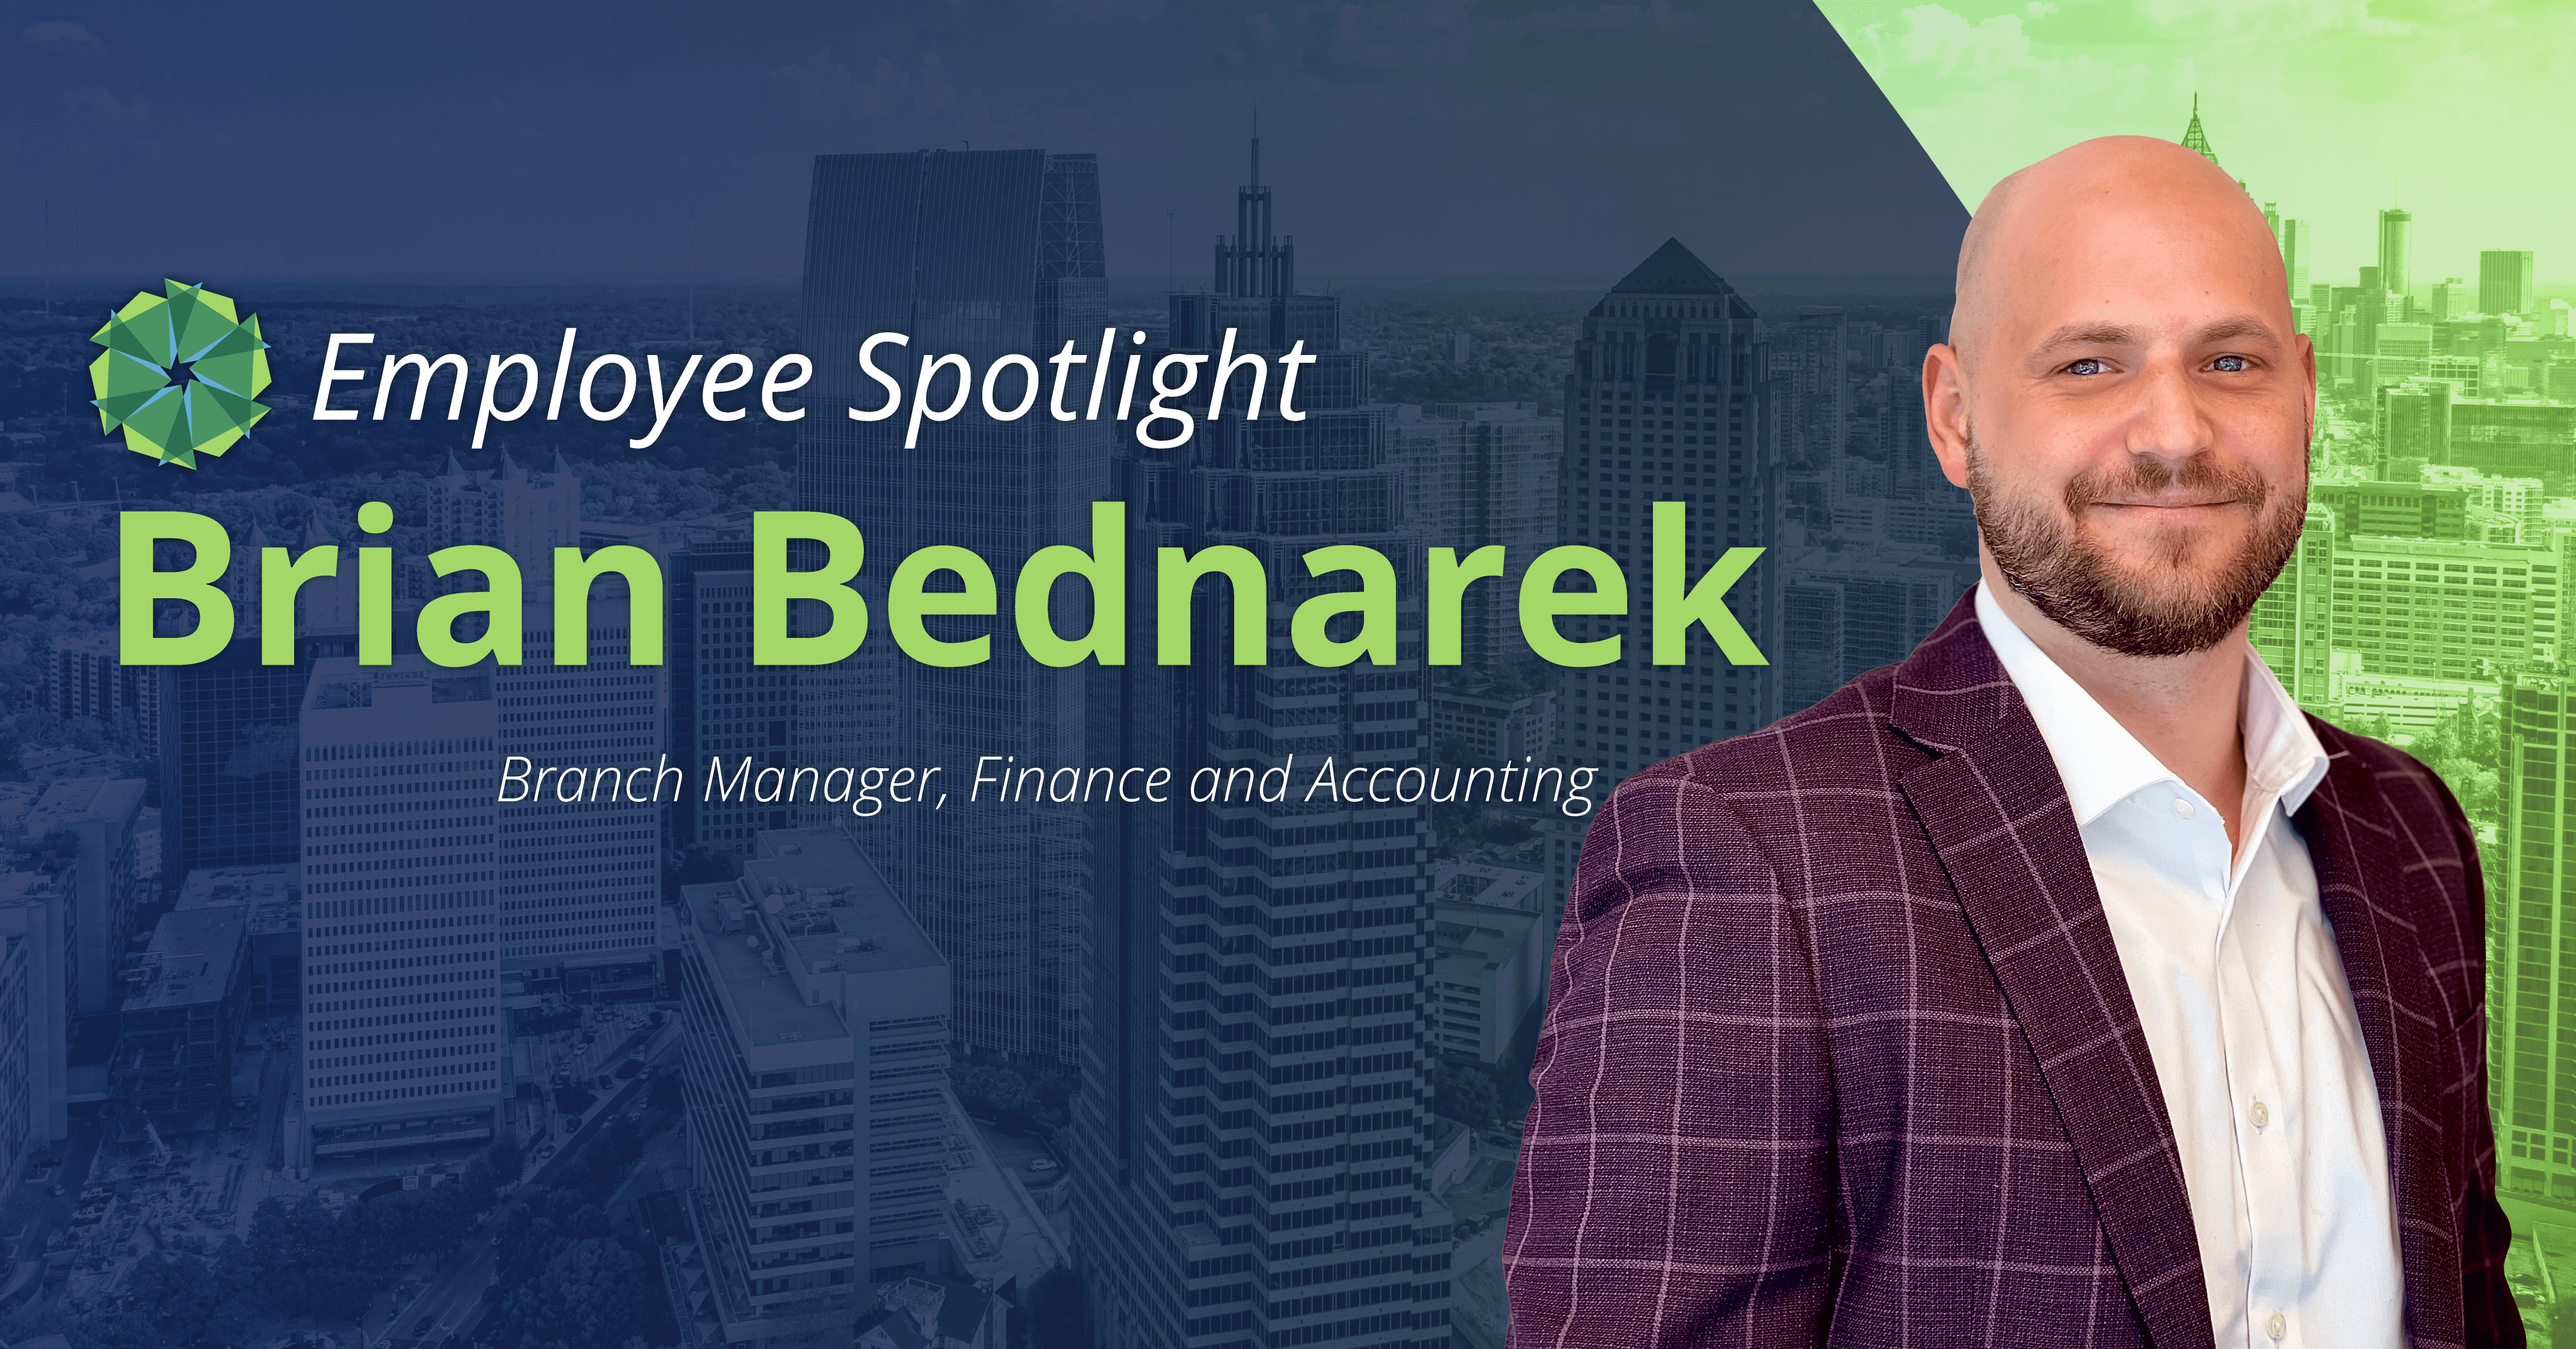 Brian Bednarek- Branch Manager Finance & Accounting